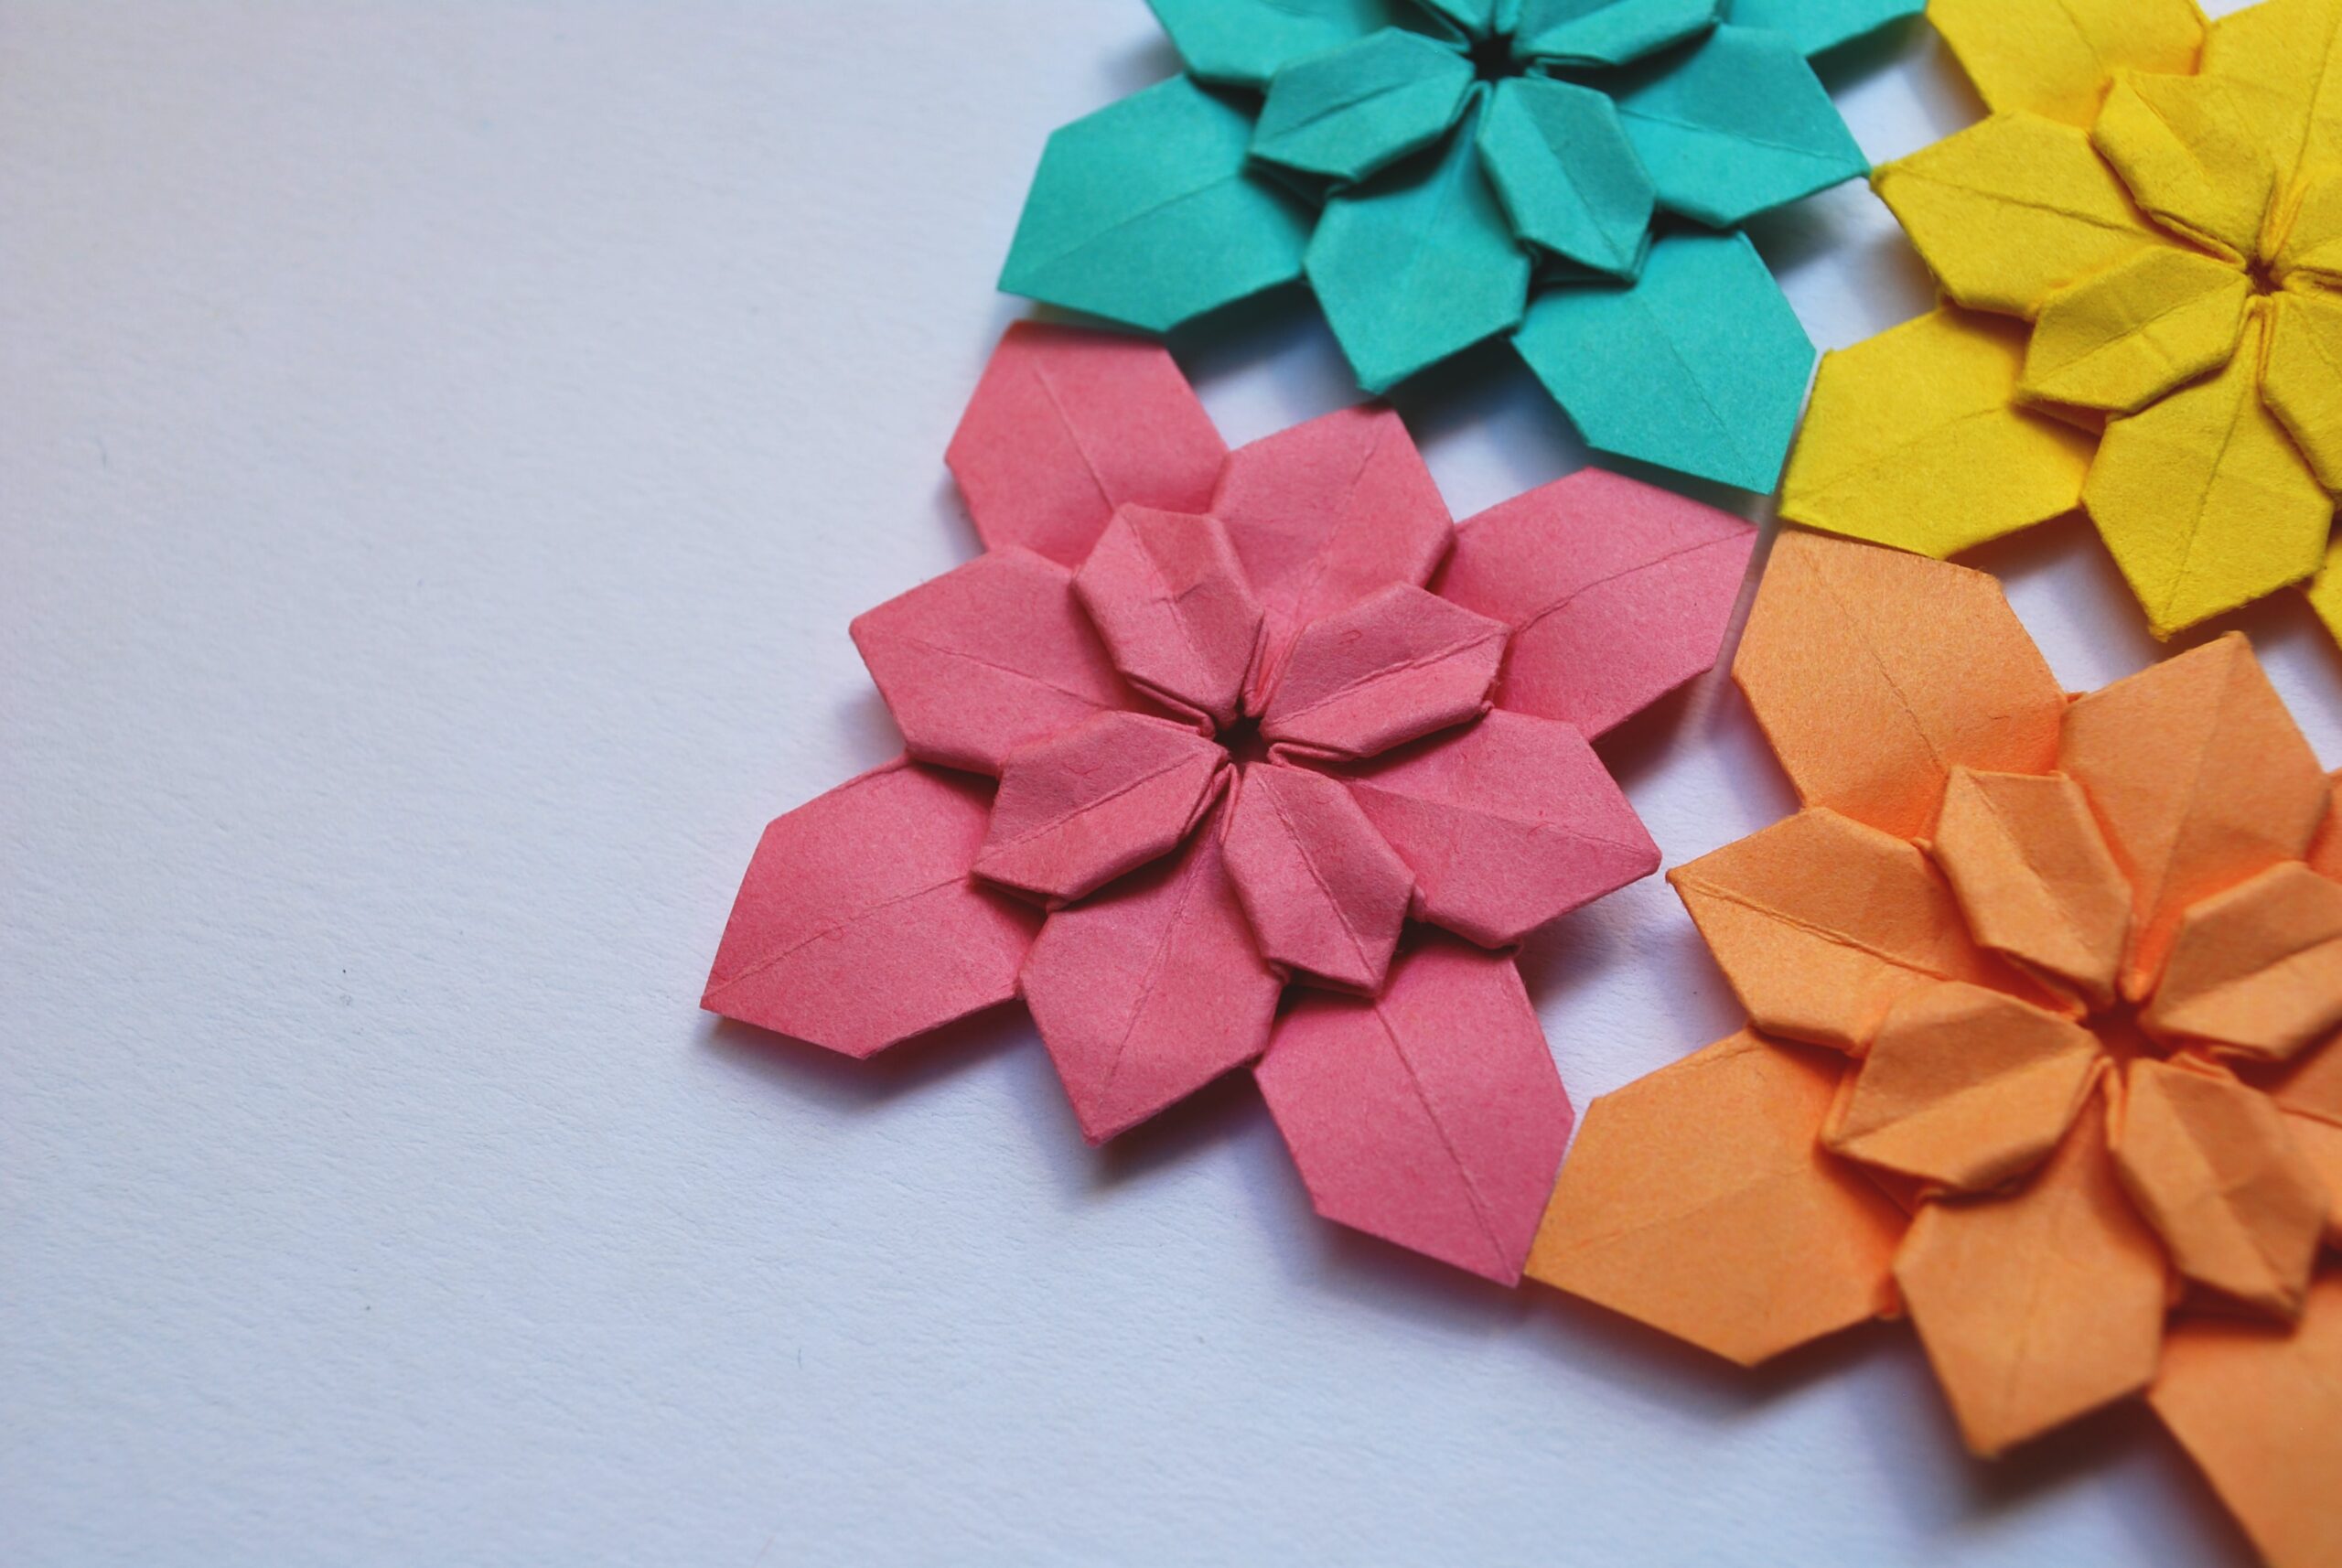 orgami made with coloured paper